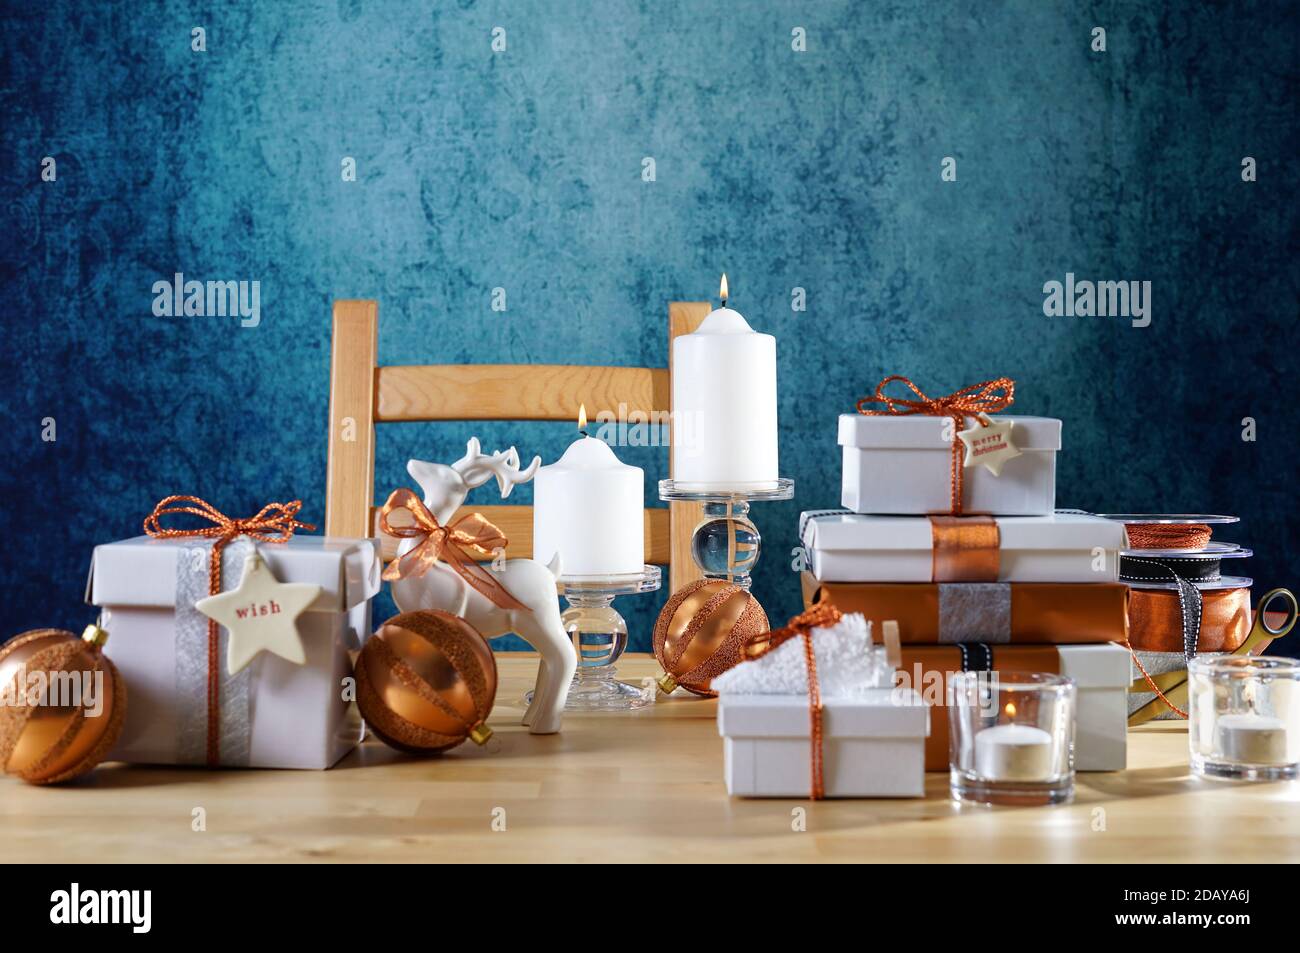 Festive Christmas gifts and gift wrapping in copper and white theme, with candles and ornaments on a natural wood table against a blue background. Neg Stock Photo